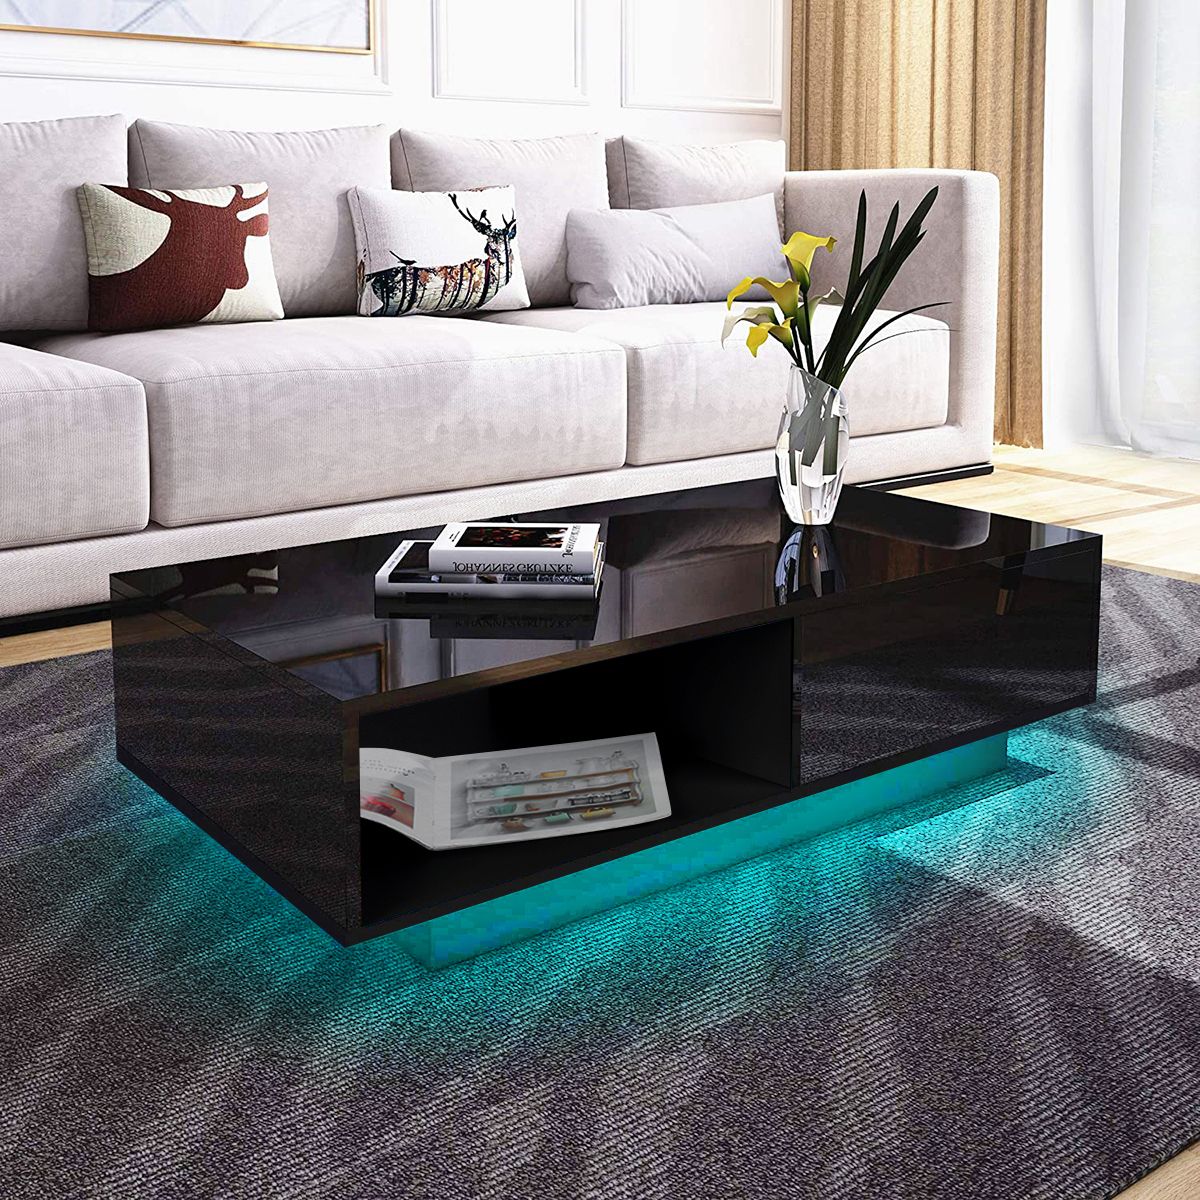 Hommpa High Gloss Led Coffee Table W/ 4 Drawers Living Room With Remote In Led Coffee Tables With 4 Drawers (Photo 11 of 15)